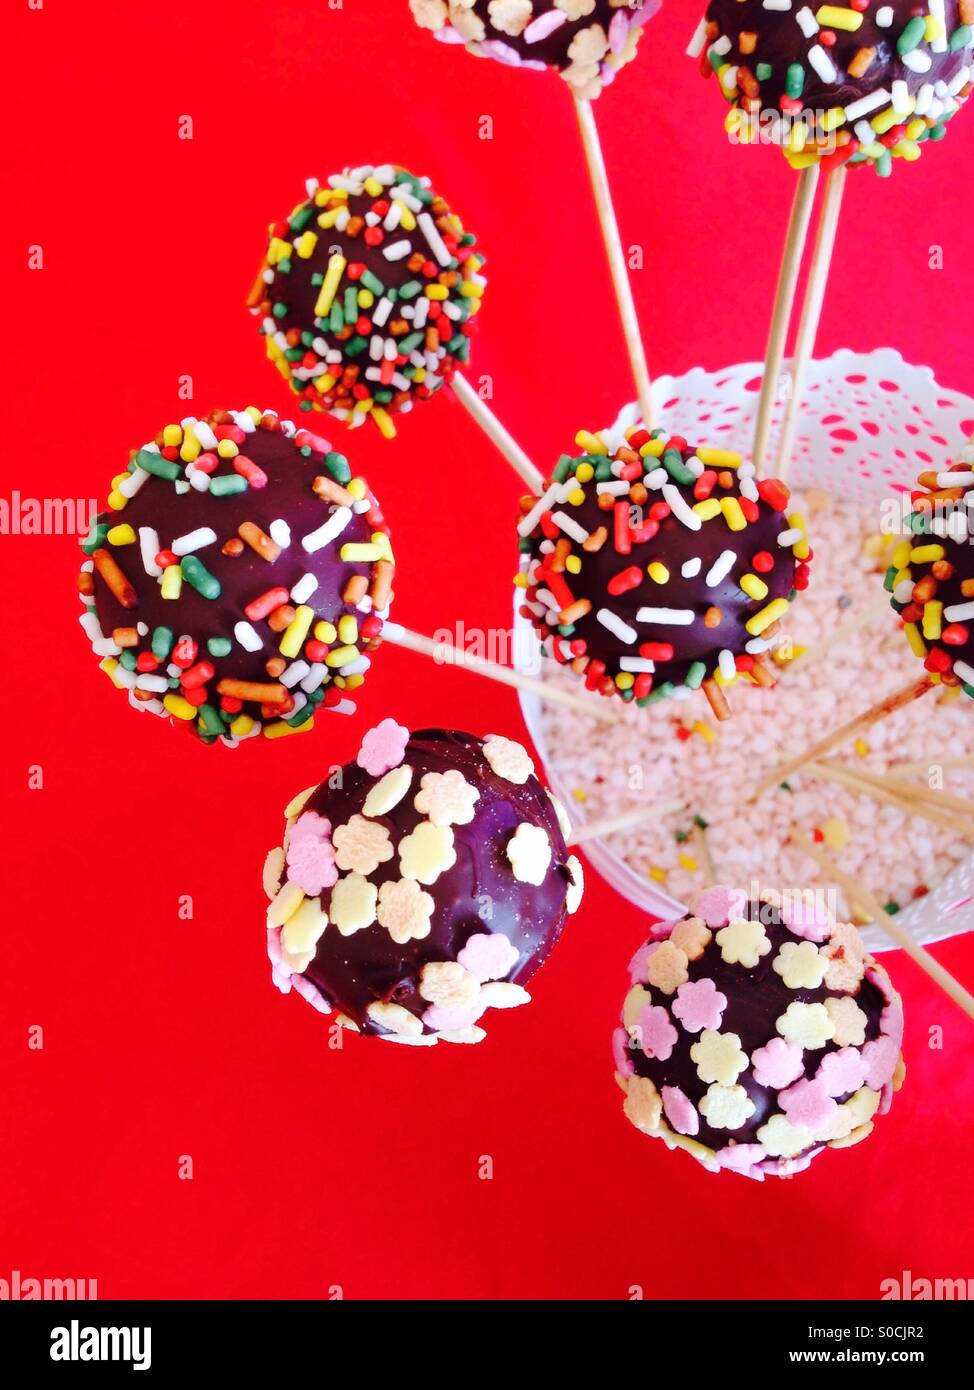 Colorful cakepops on red background Stock Photo